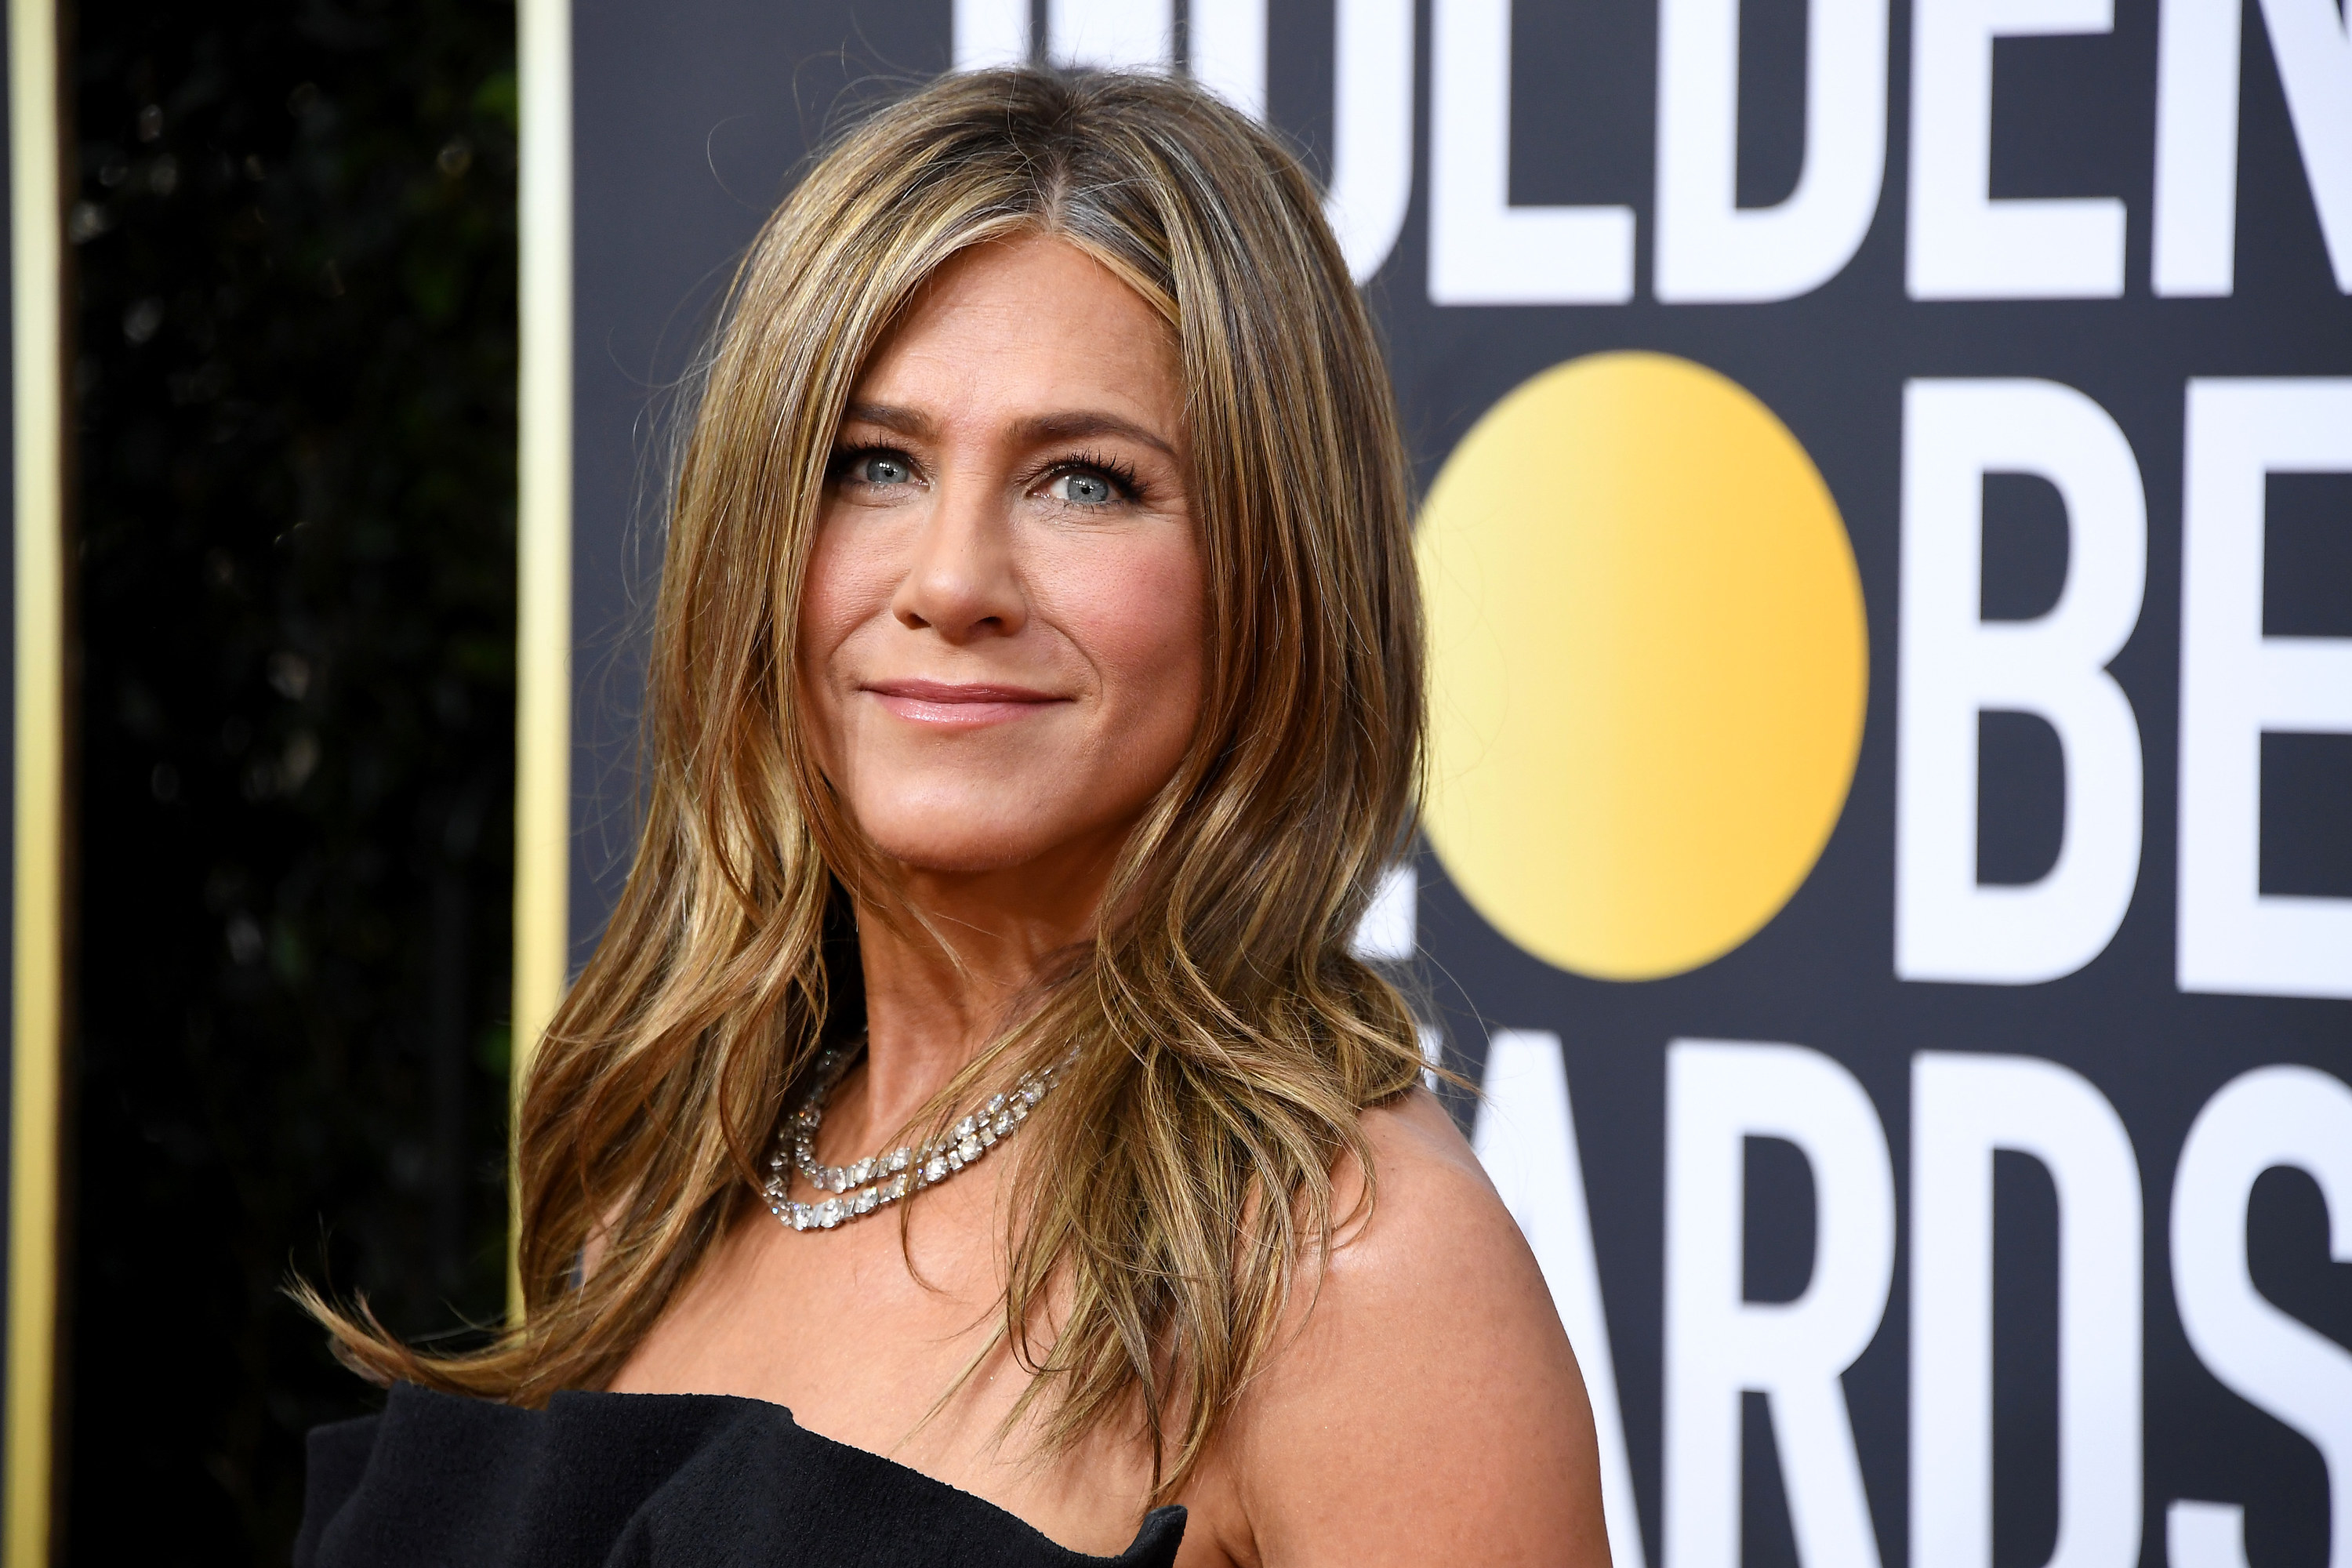 Jennifer Aniston poses on the red carpet for the 77th Annual Golden Globe Awards at The Beverly Hilton Hotel on January 05, 2020